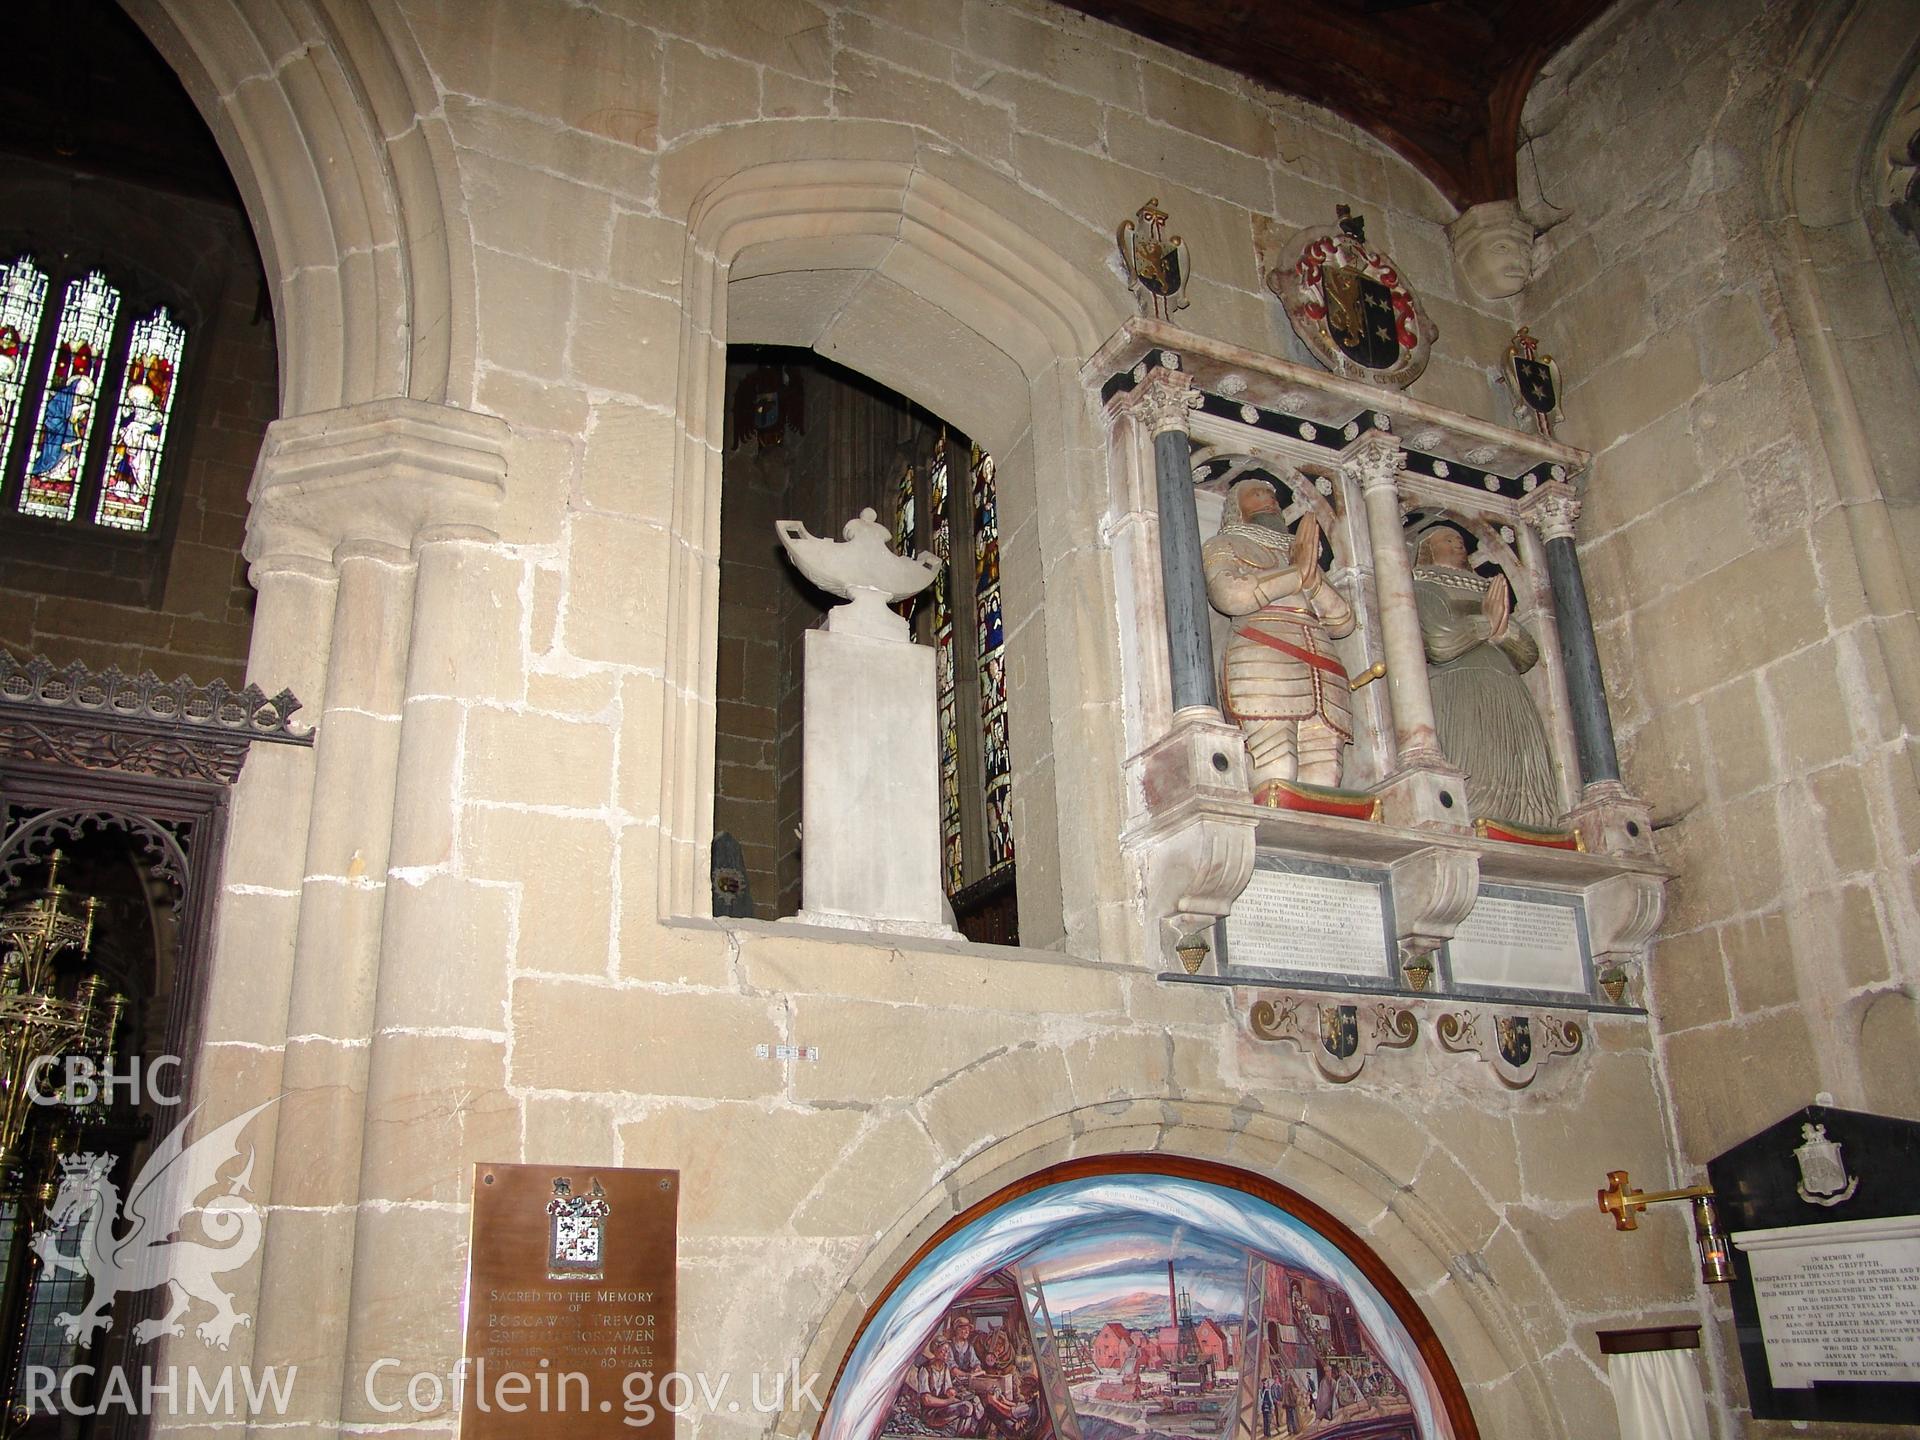 Digital colour photograph showing part of the interoir of All Saints Church, Gresford.